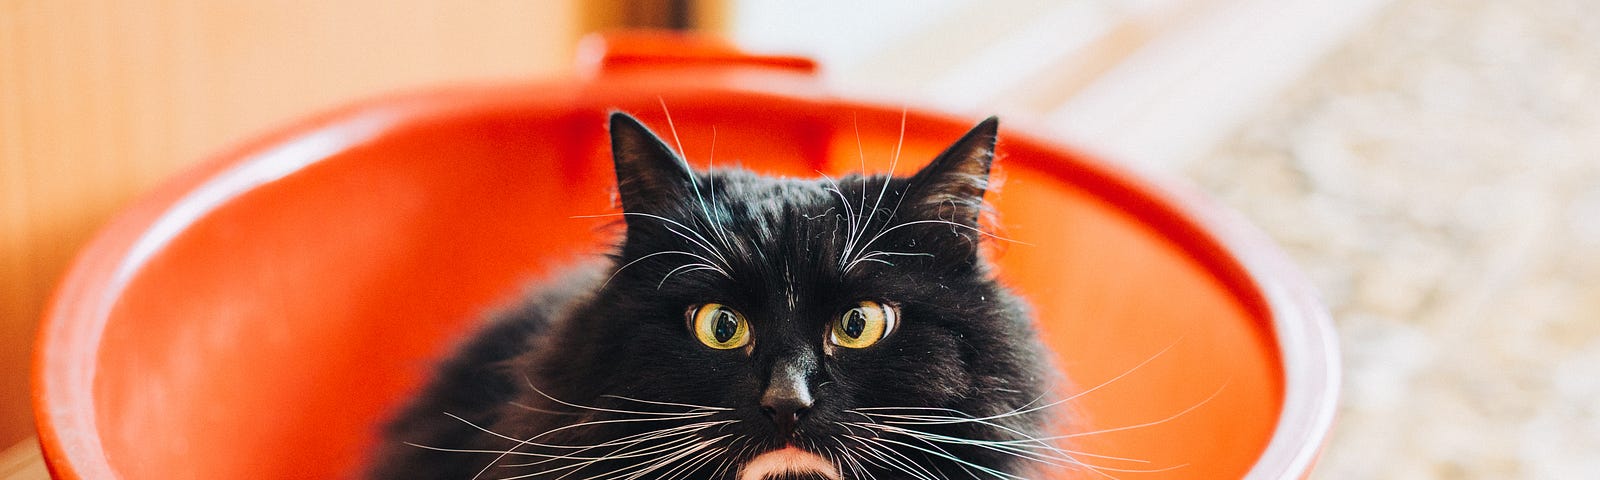 image shows a black and white cat sitting in an orange bucket